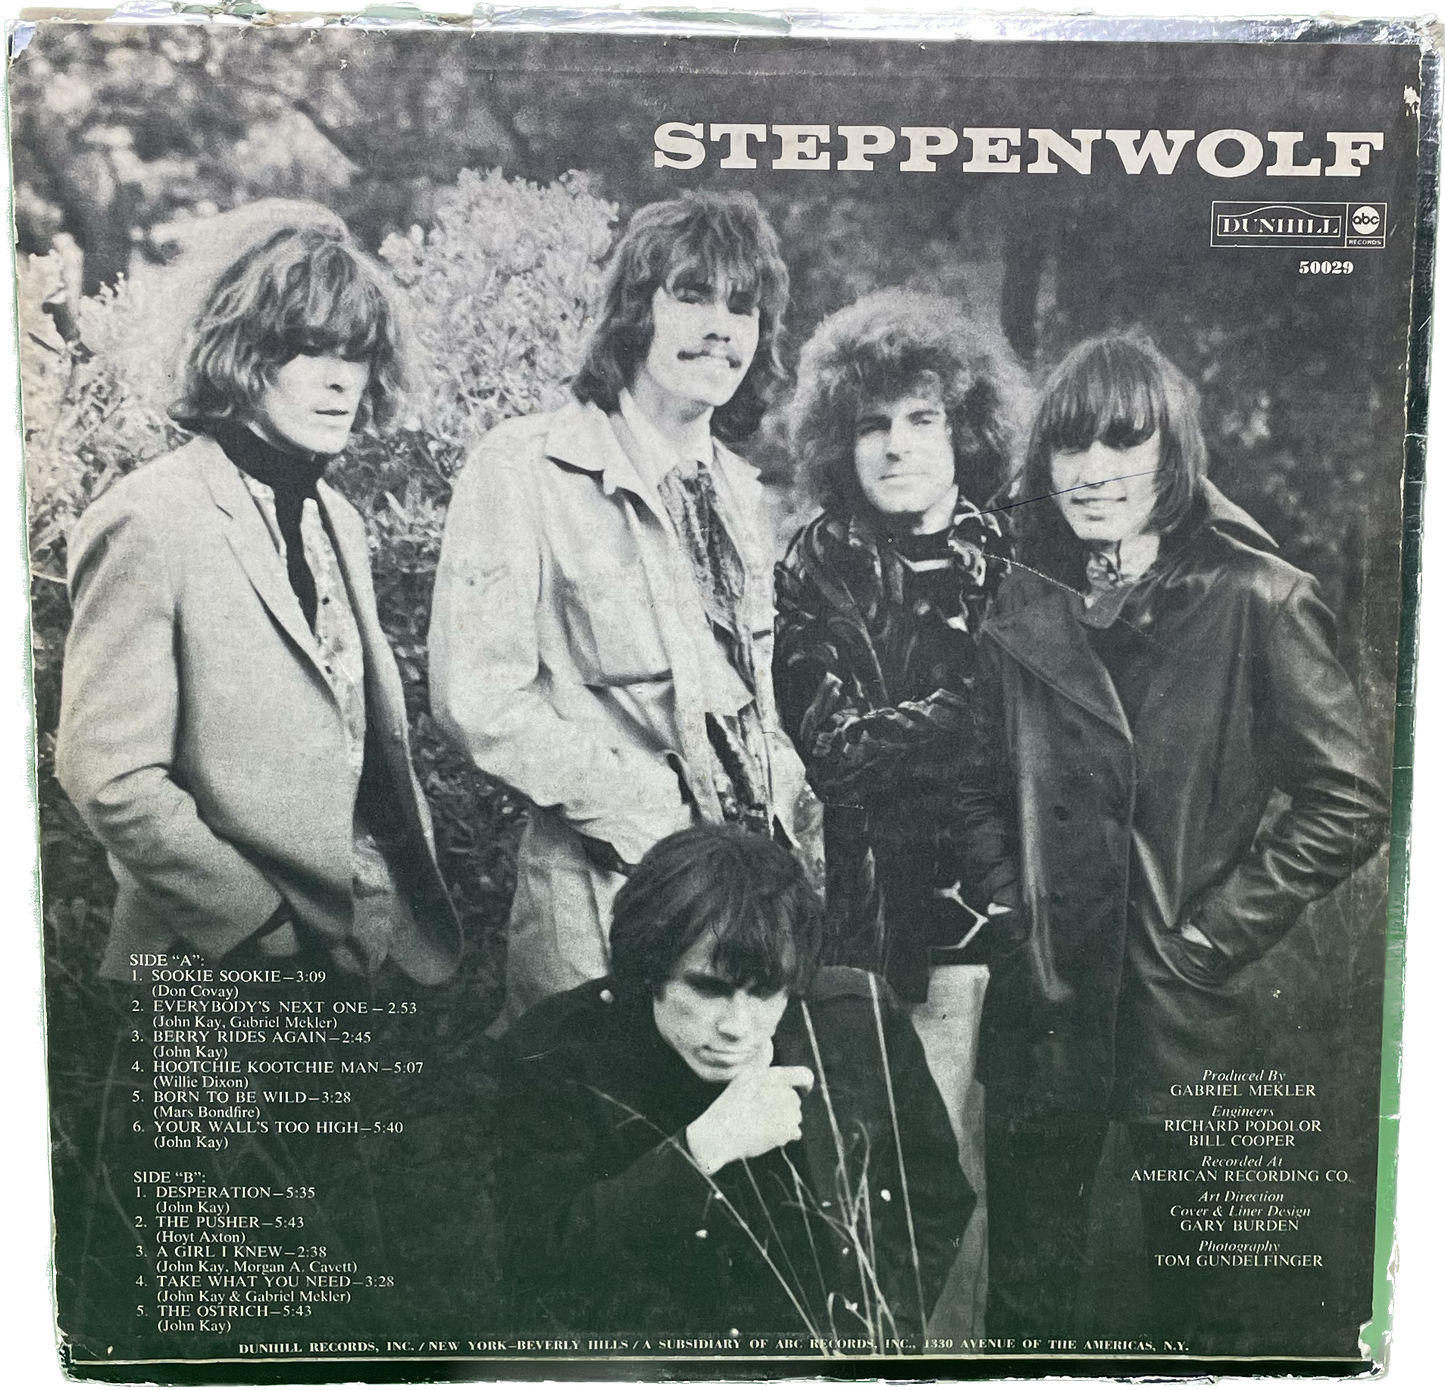 Lp P G STEPPENWOLF Self-Titled DUNHILL LP VG+/VG++ 1st press born to be wild the pusher